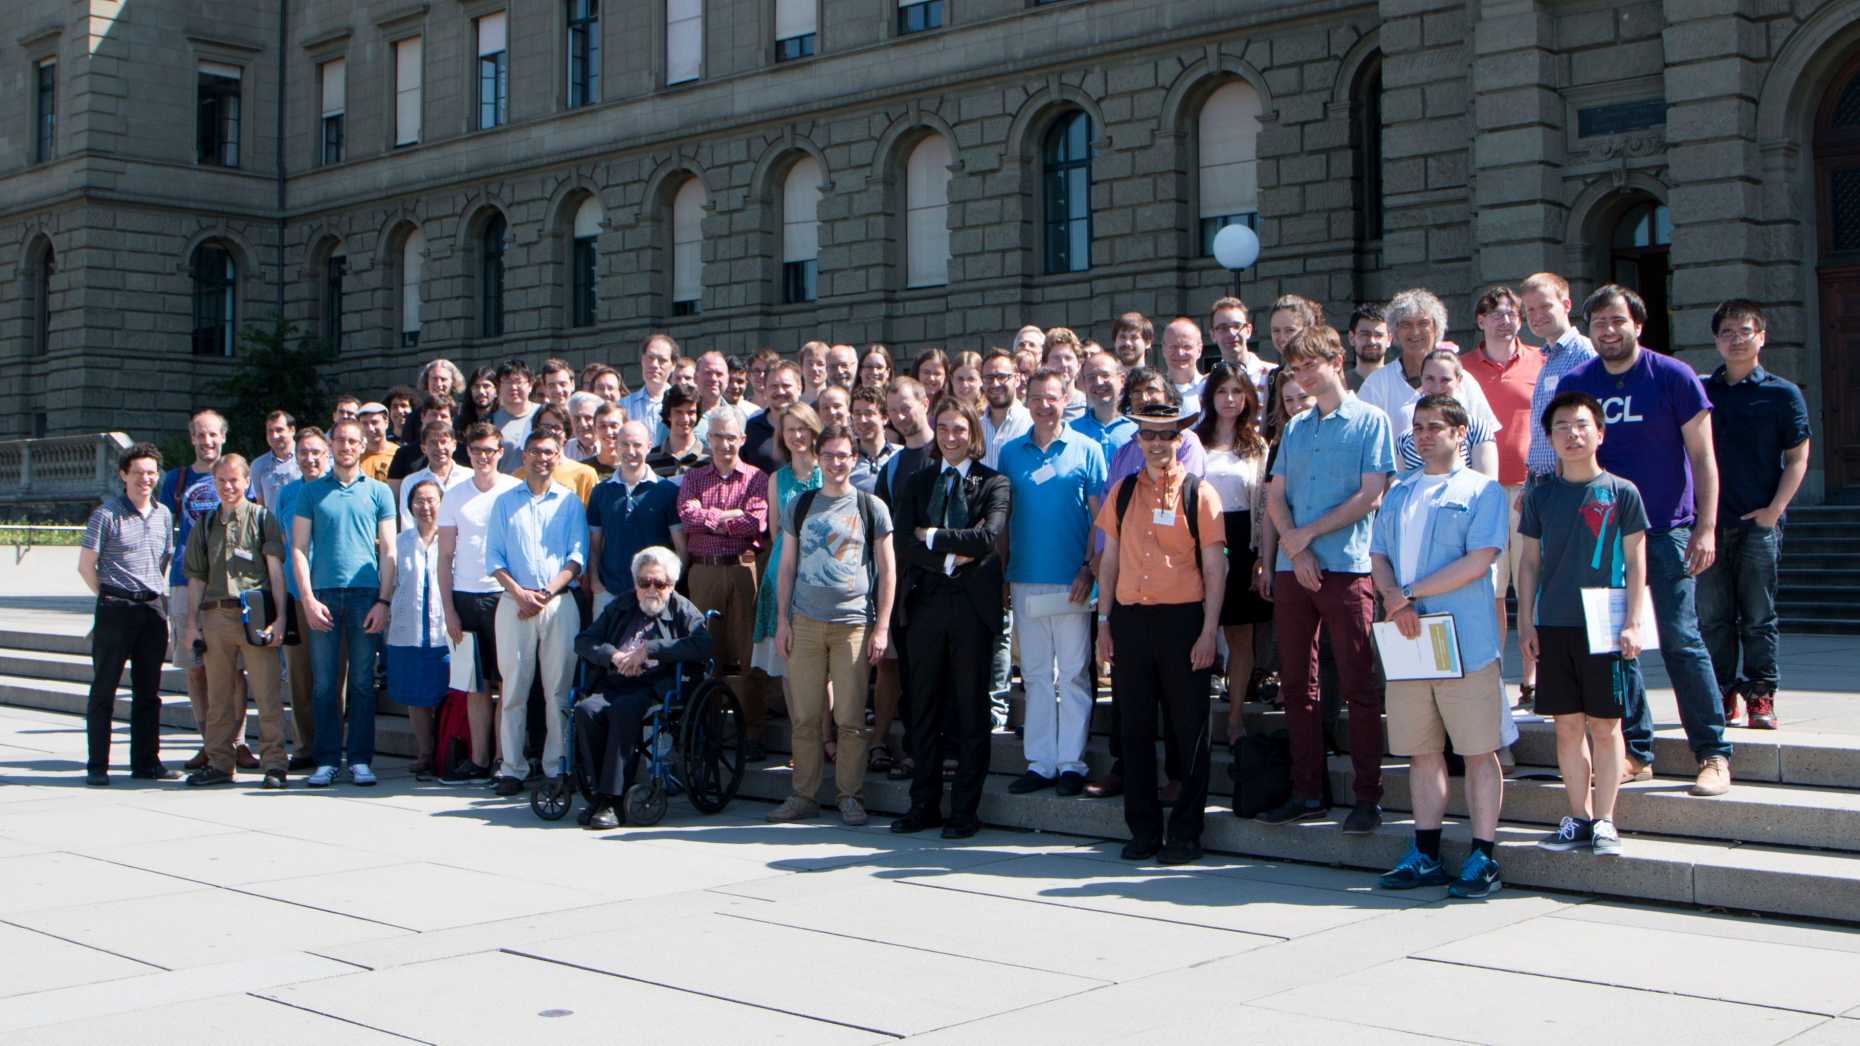 Enlarged view: 50 Years FIM group photo